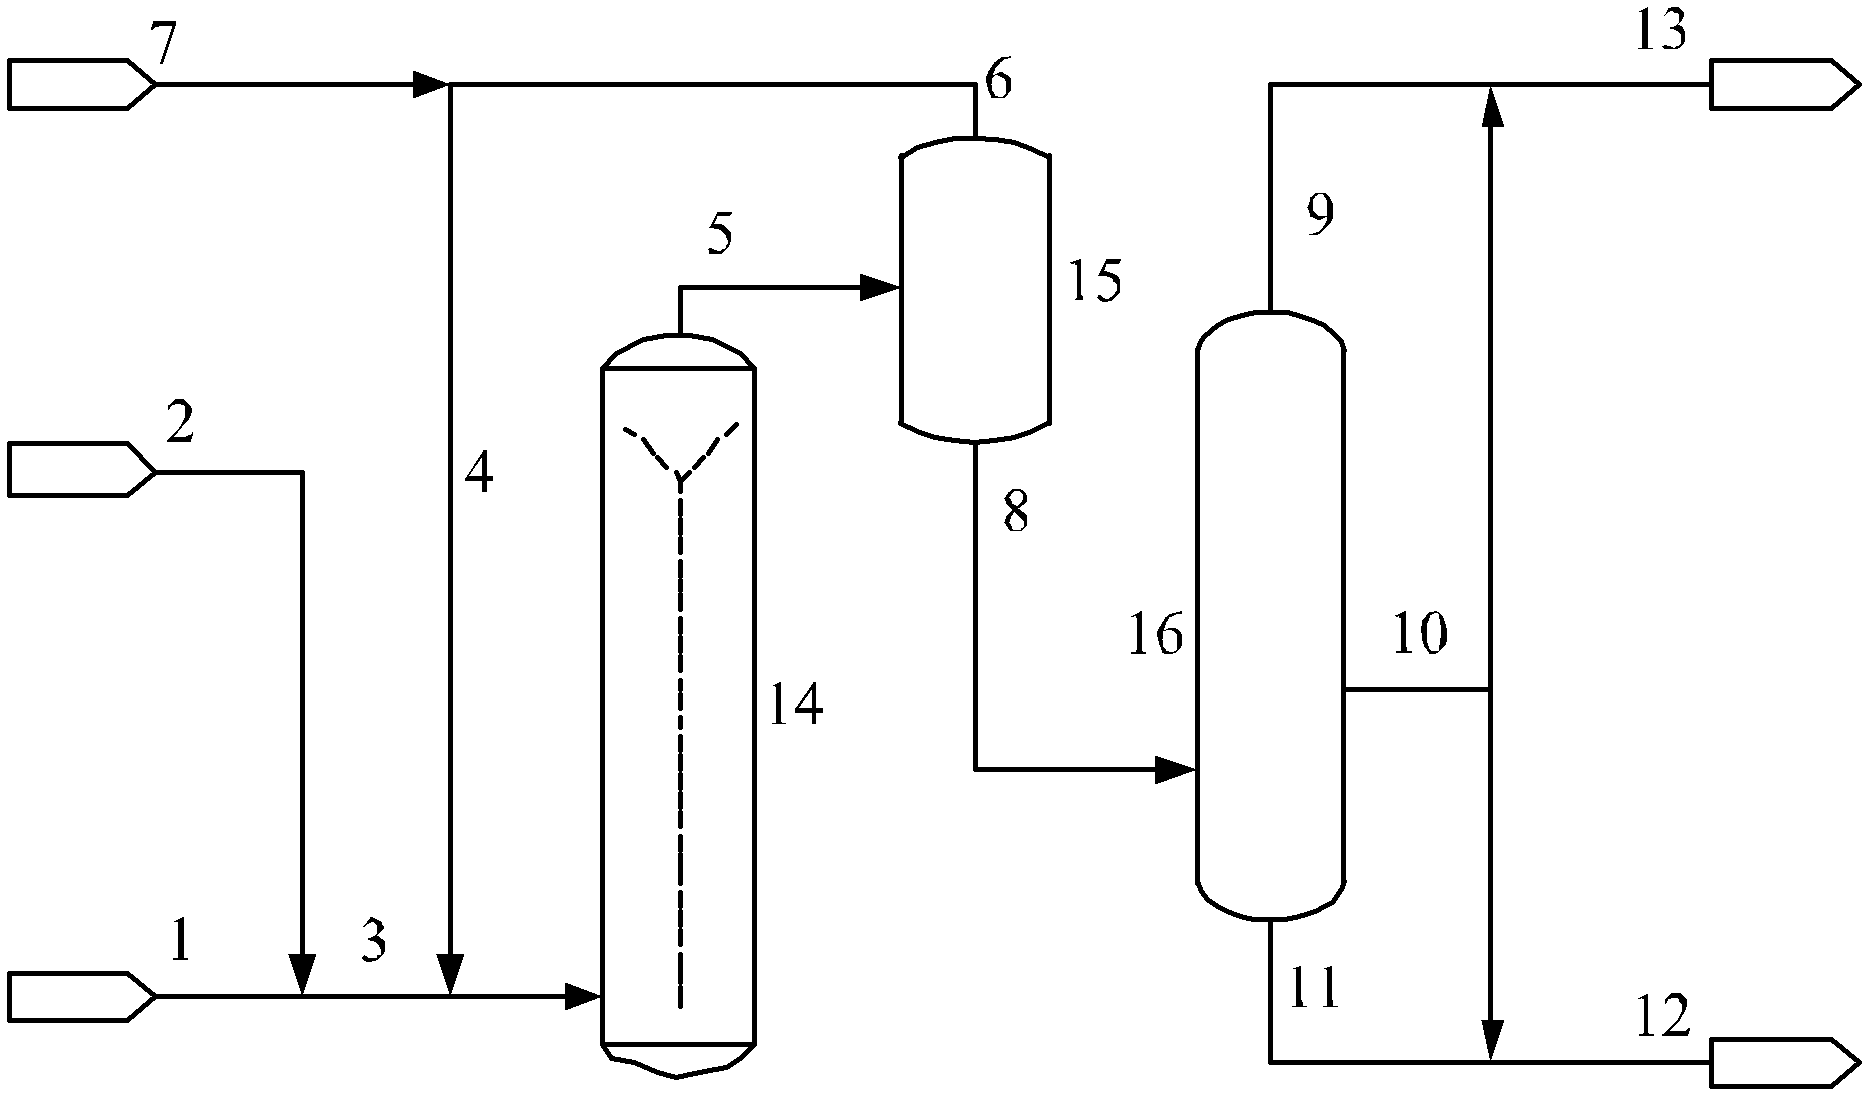 Method for mixing and processing wash oil and direct coal liquefaction oil